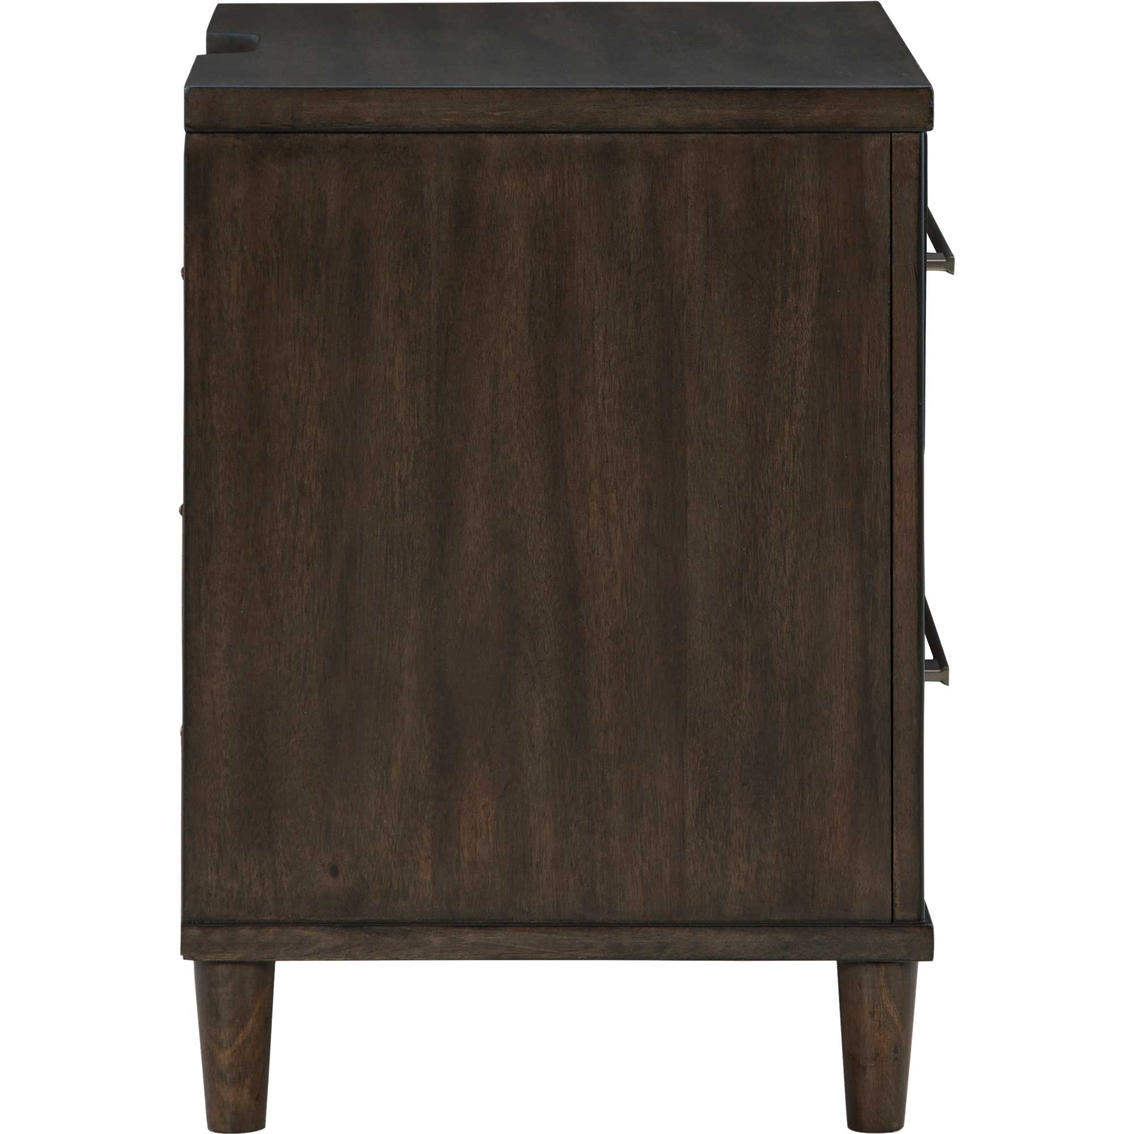 Signature Design by Ashley Wittland Nightstand - Image 3 of 7